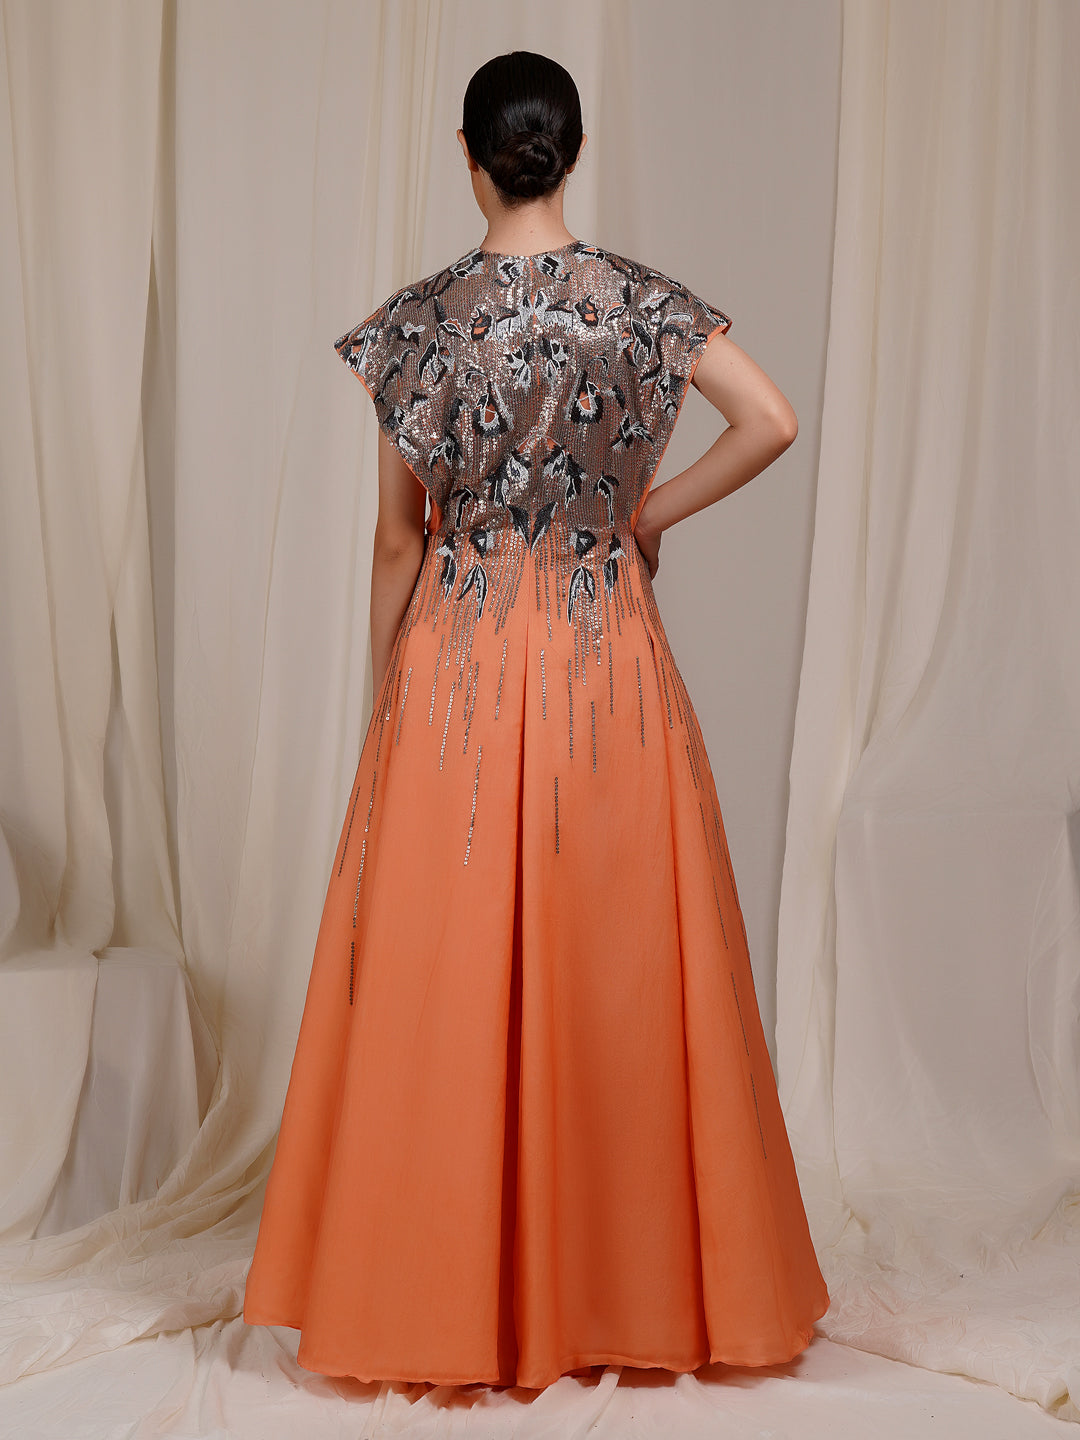 A Peach organza Silk Jacket Gown With Sturdy And Extended Shoulders